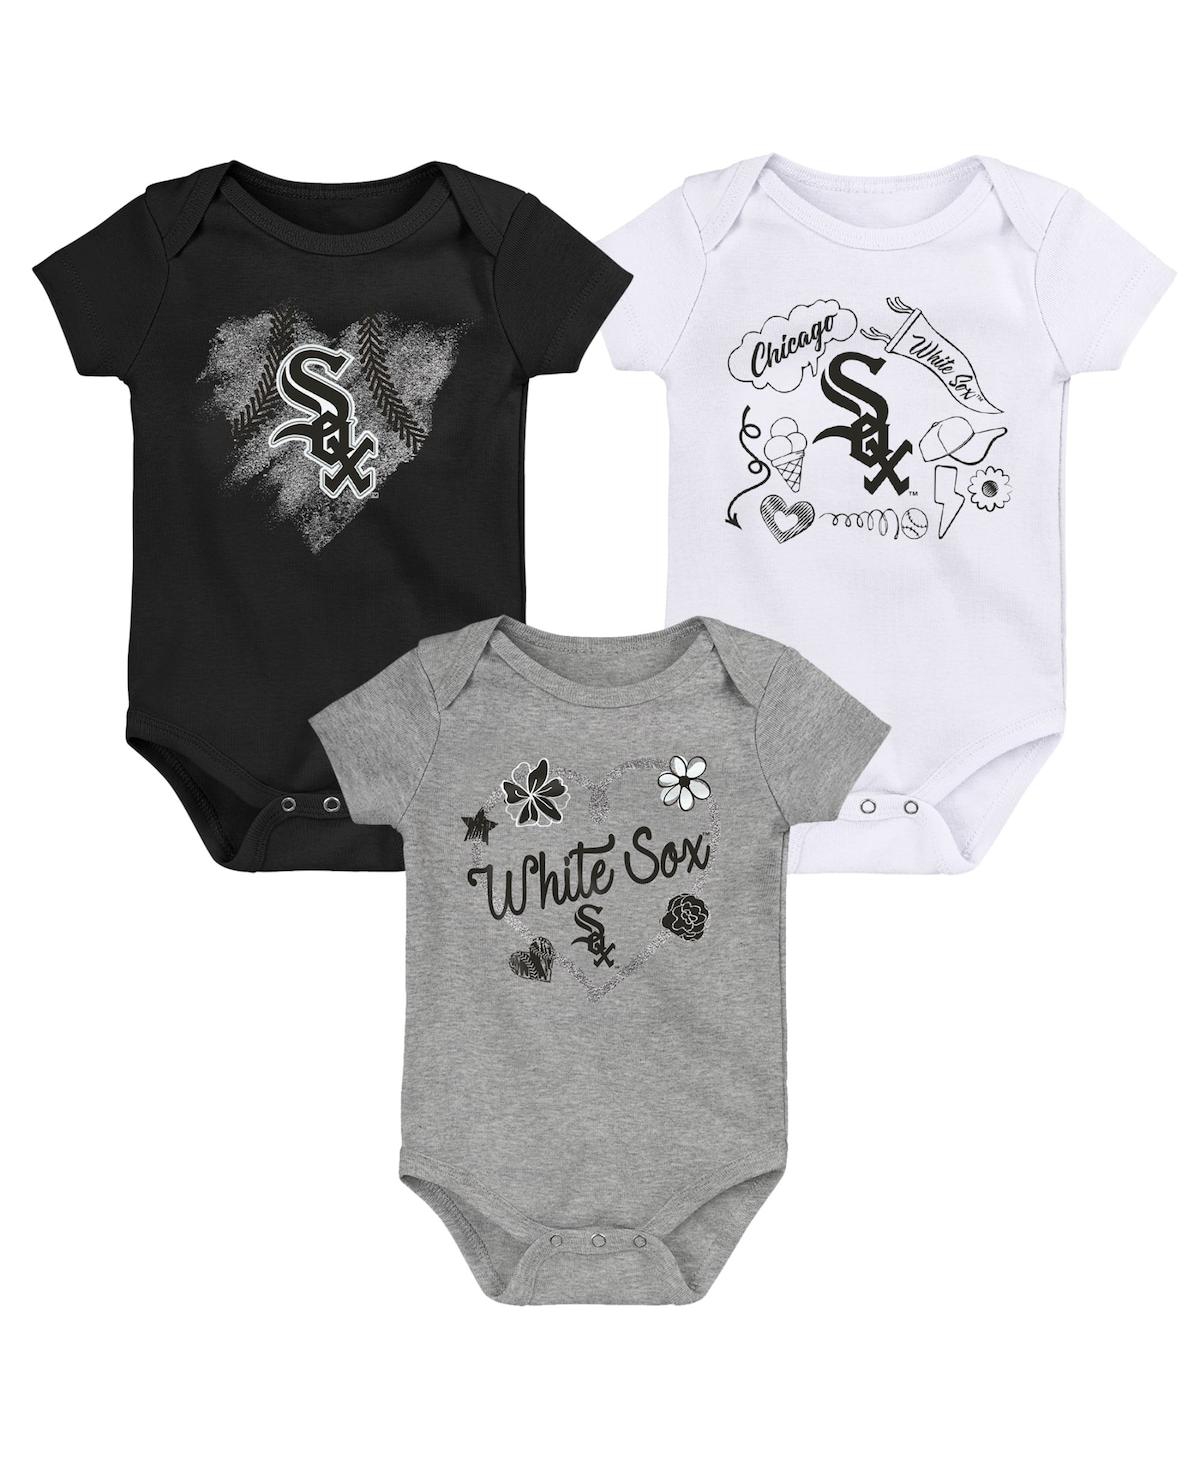 OUTERSTUFF INFANT BOYS AND GIRLS BLACK AND WHITE AND GRAY CHICAGO WHITE SOX BATTER UP 3-PACK BODYSUIT SET